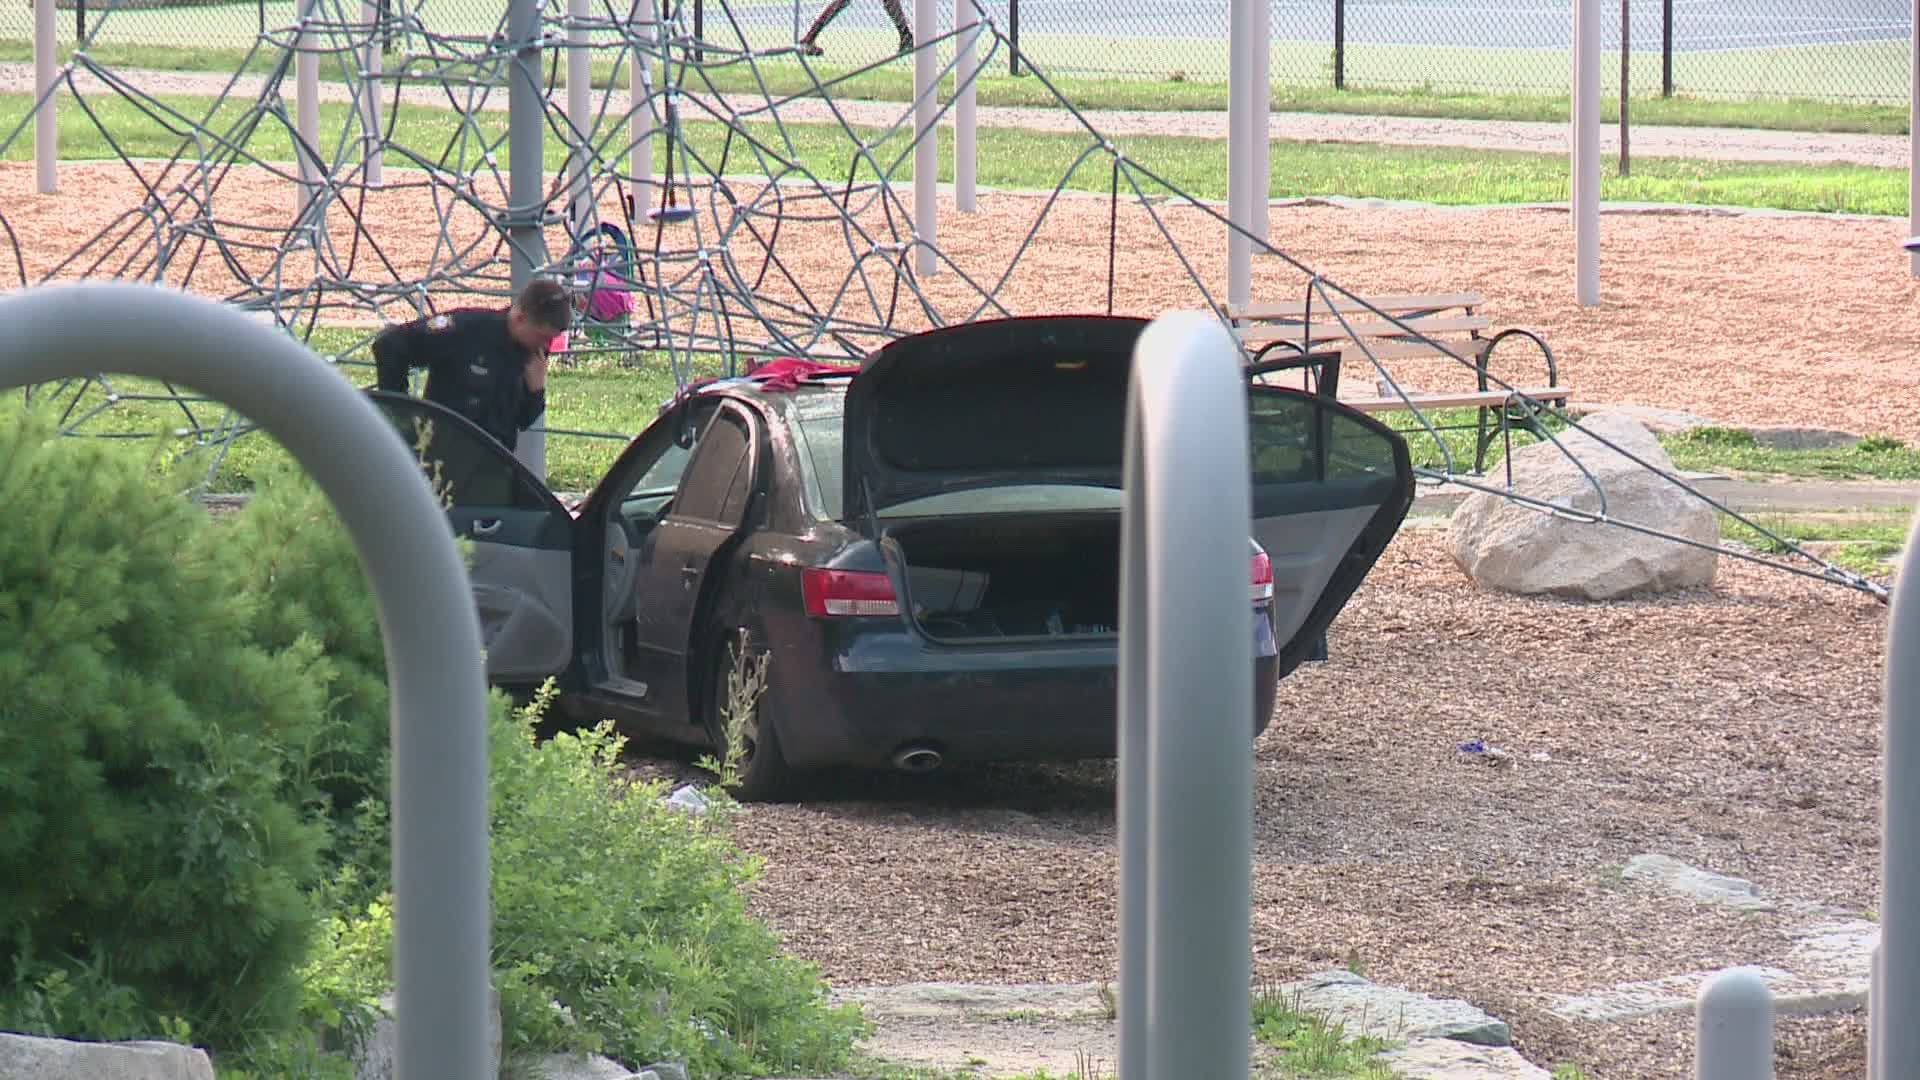 Police are investigating after a car drove into baseball stands and through a park in Portland